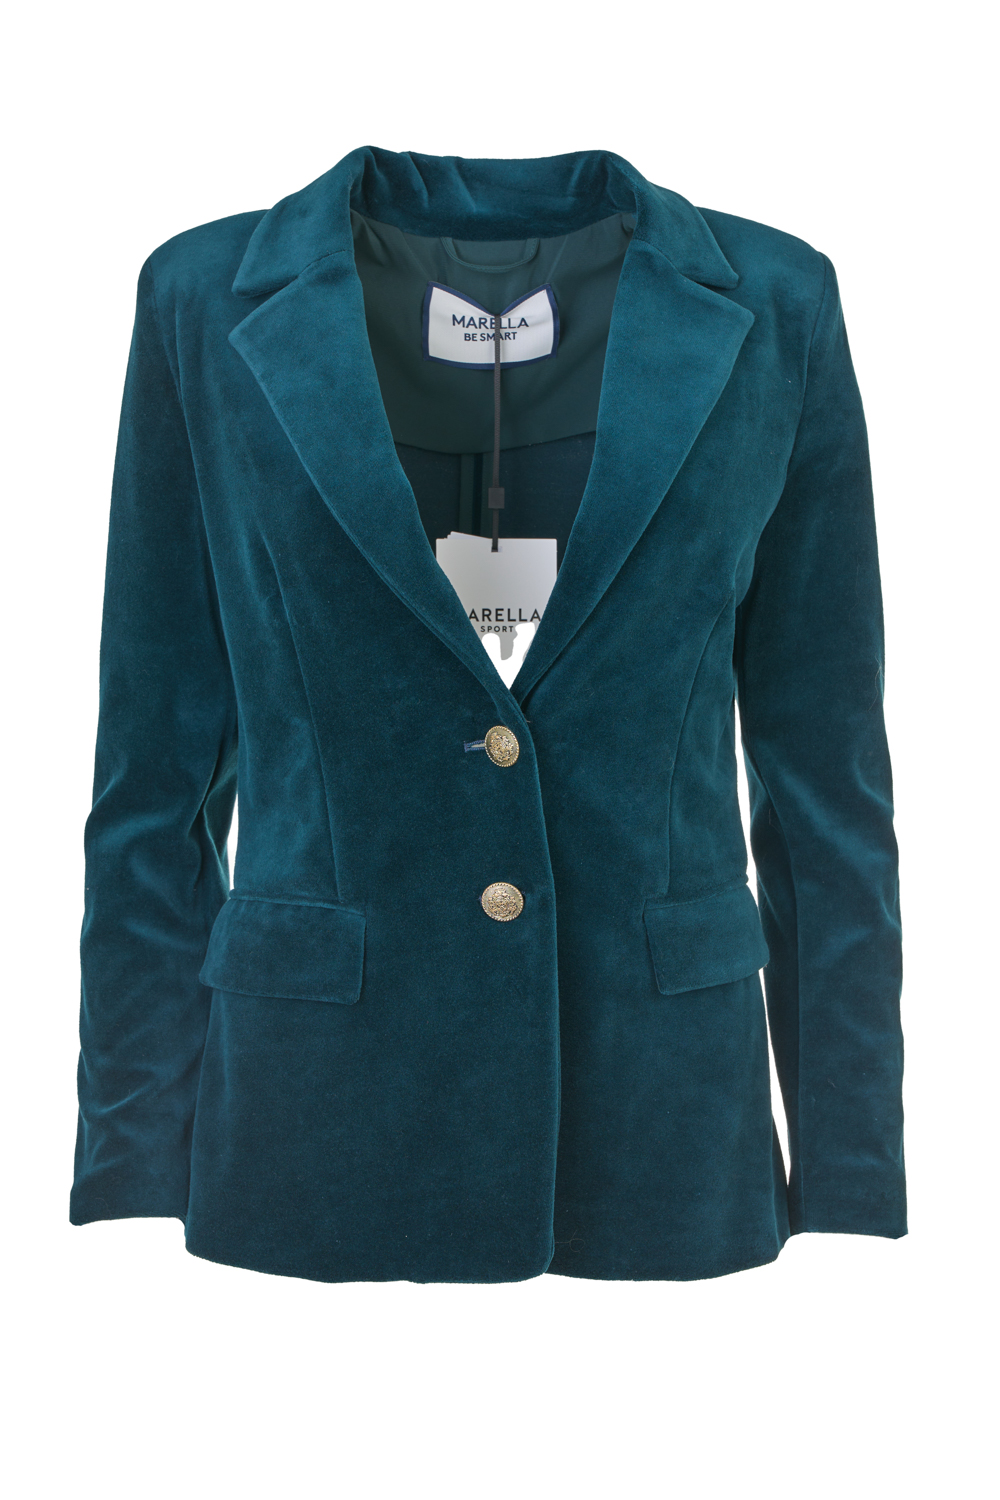 Soft Curved Stretchy Velvet Jacket (without Lining) and Decorative Buttons – Marella